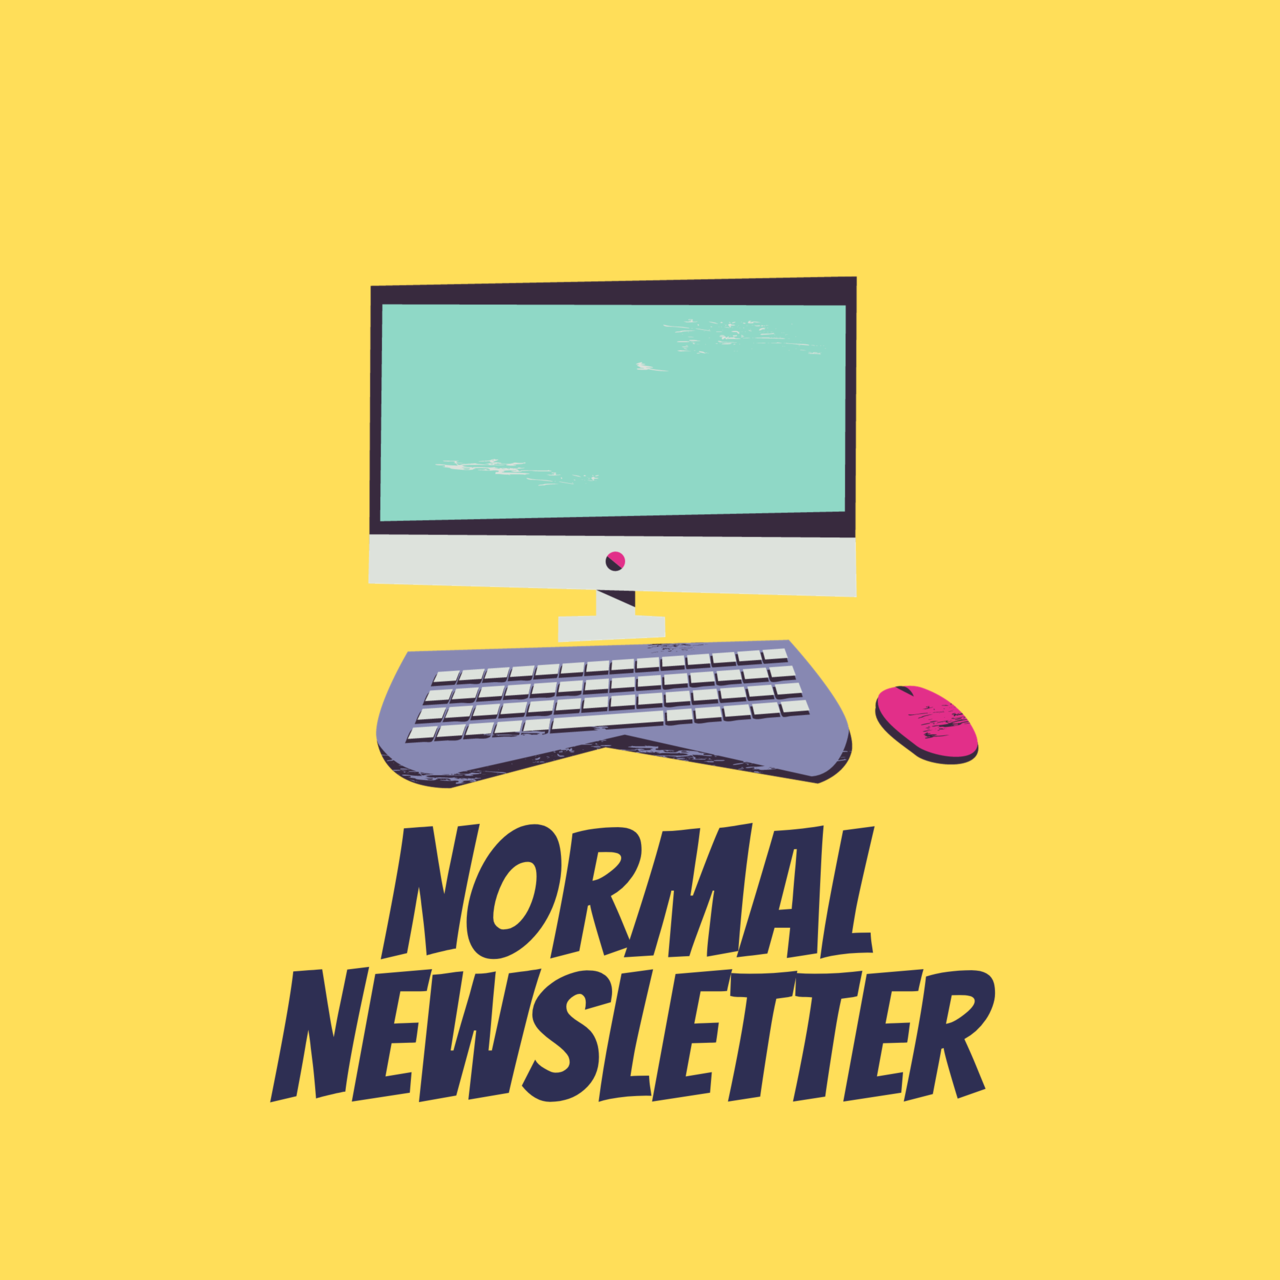 The Normal Newsletter